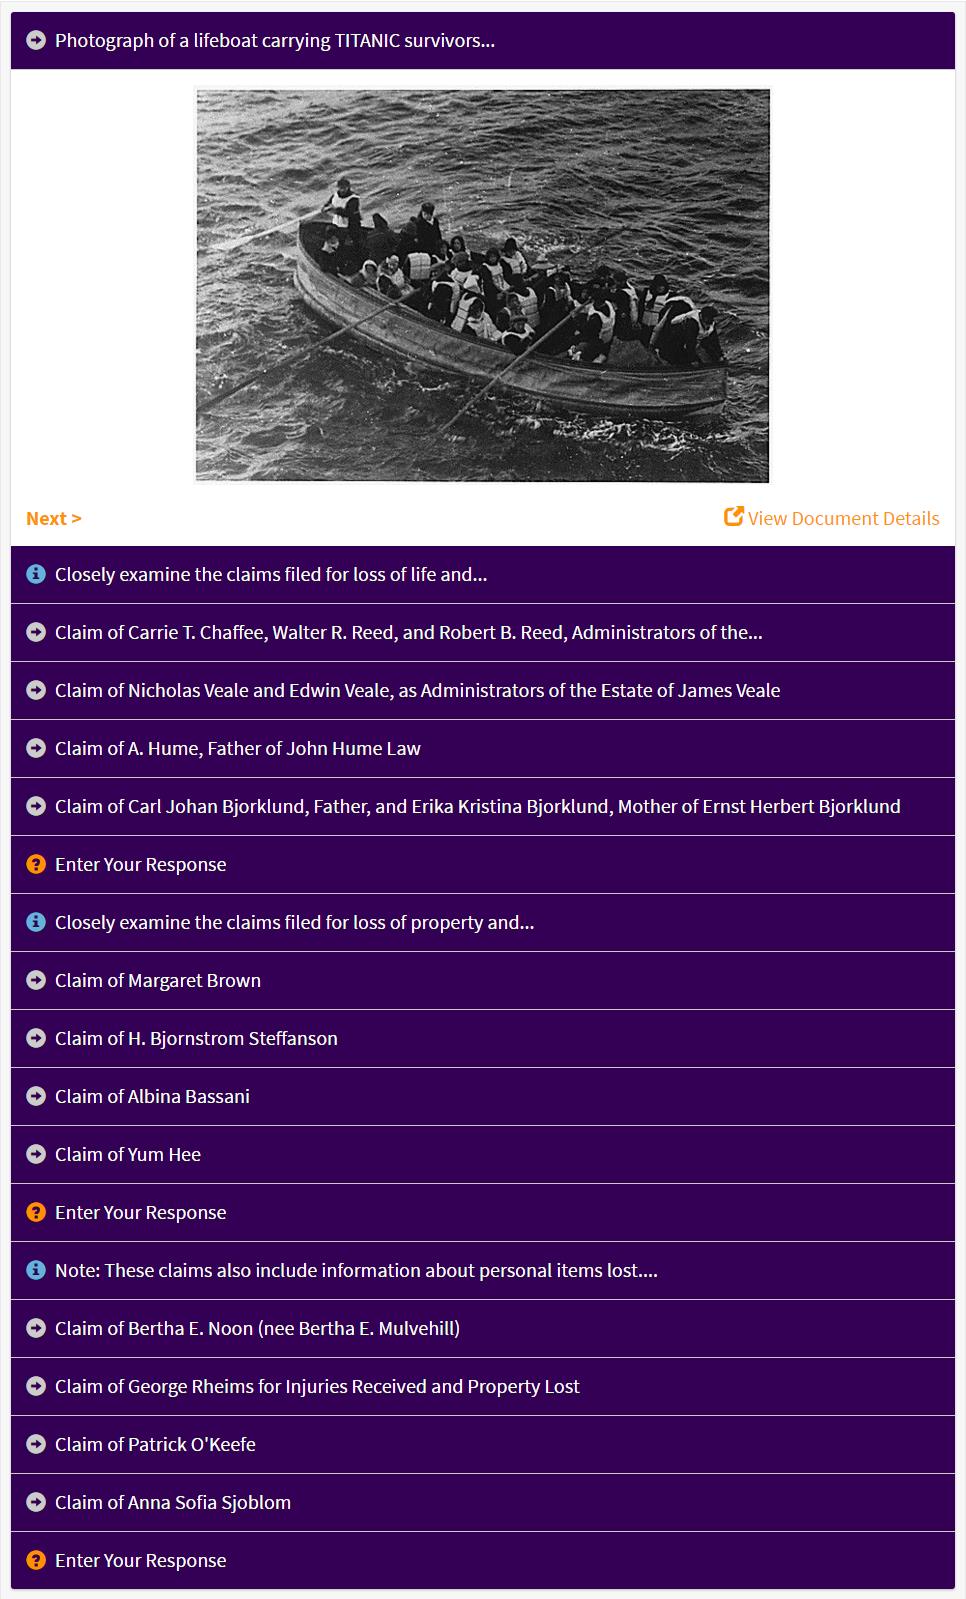 The Titanic Disaster: Measuring Loss of Life, Property and Injuries activity